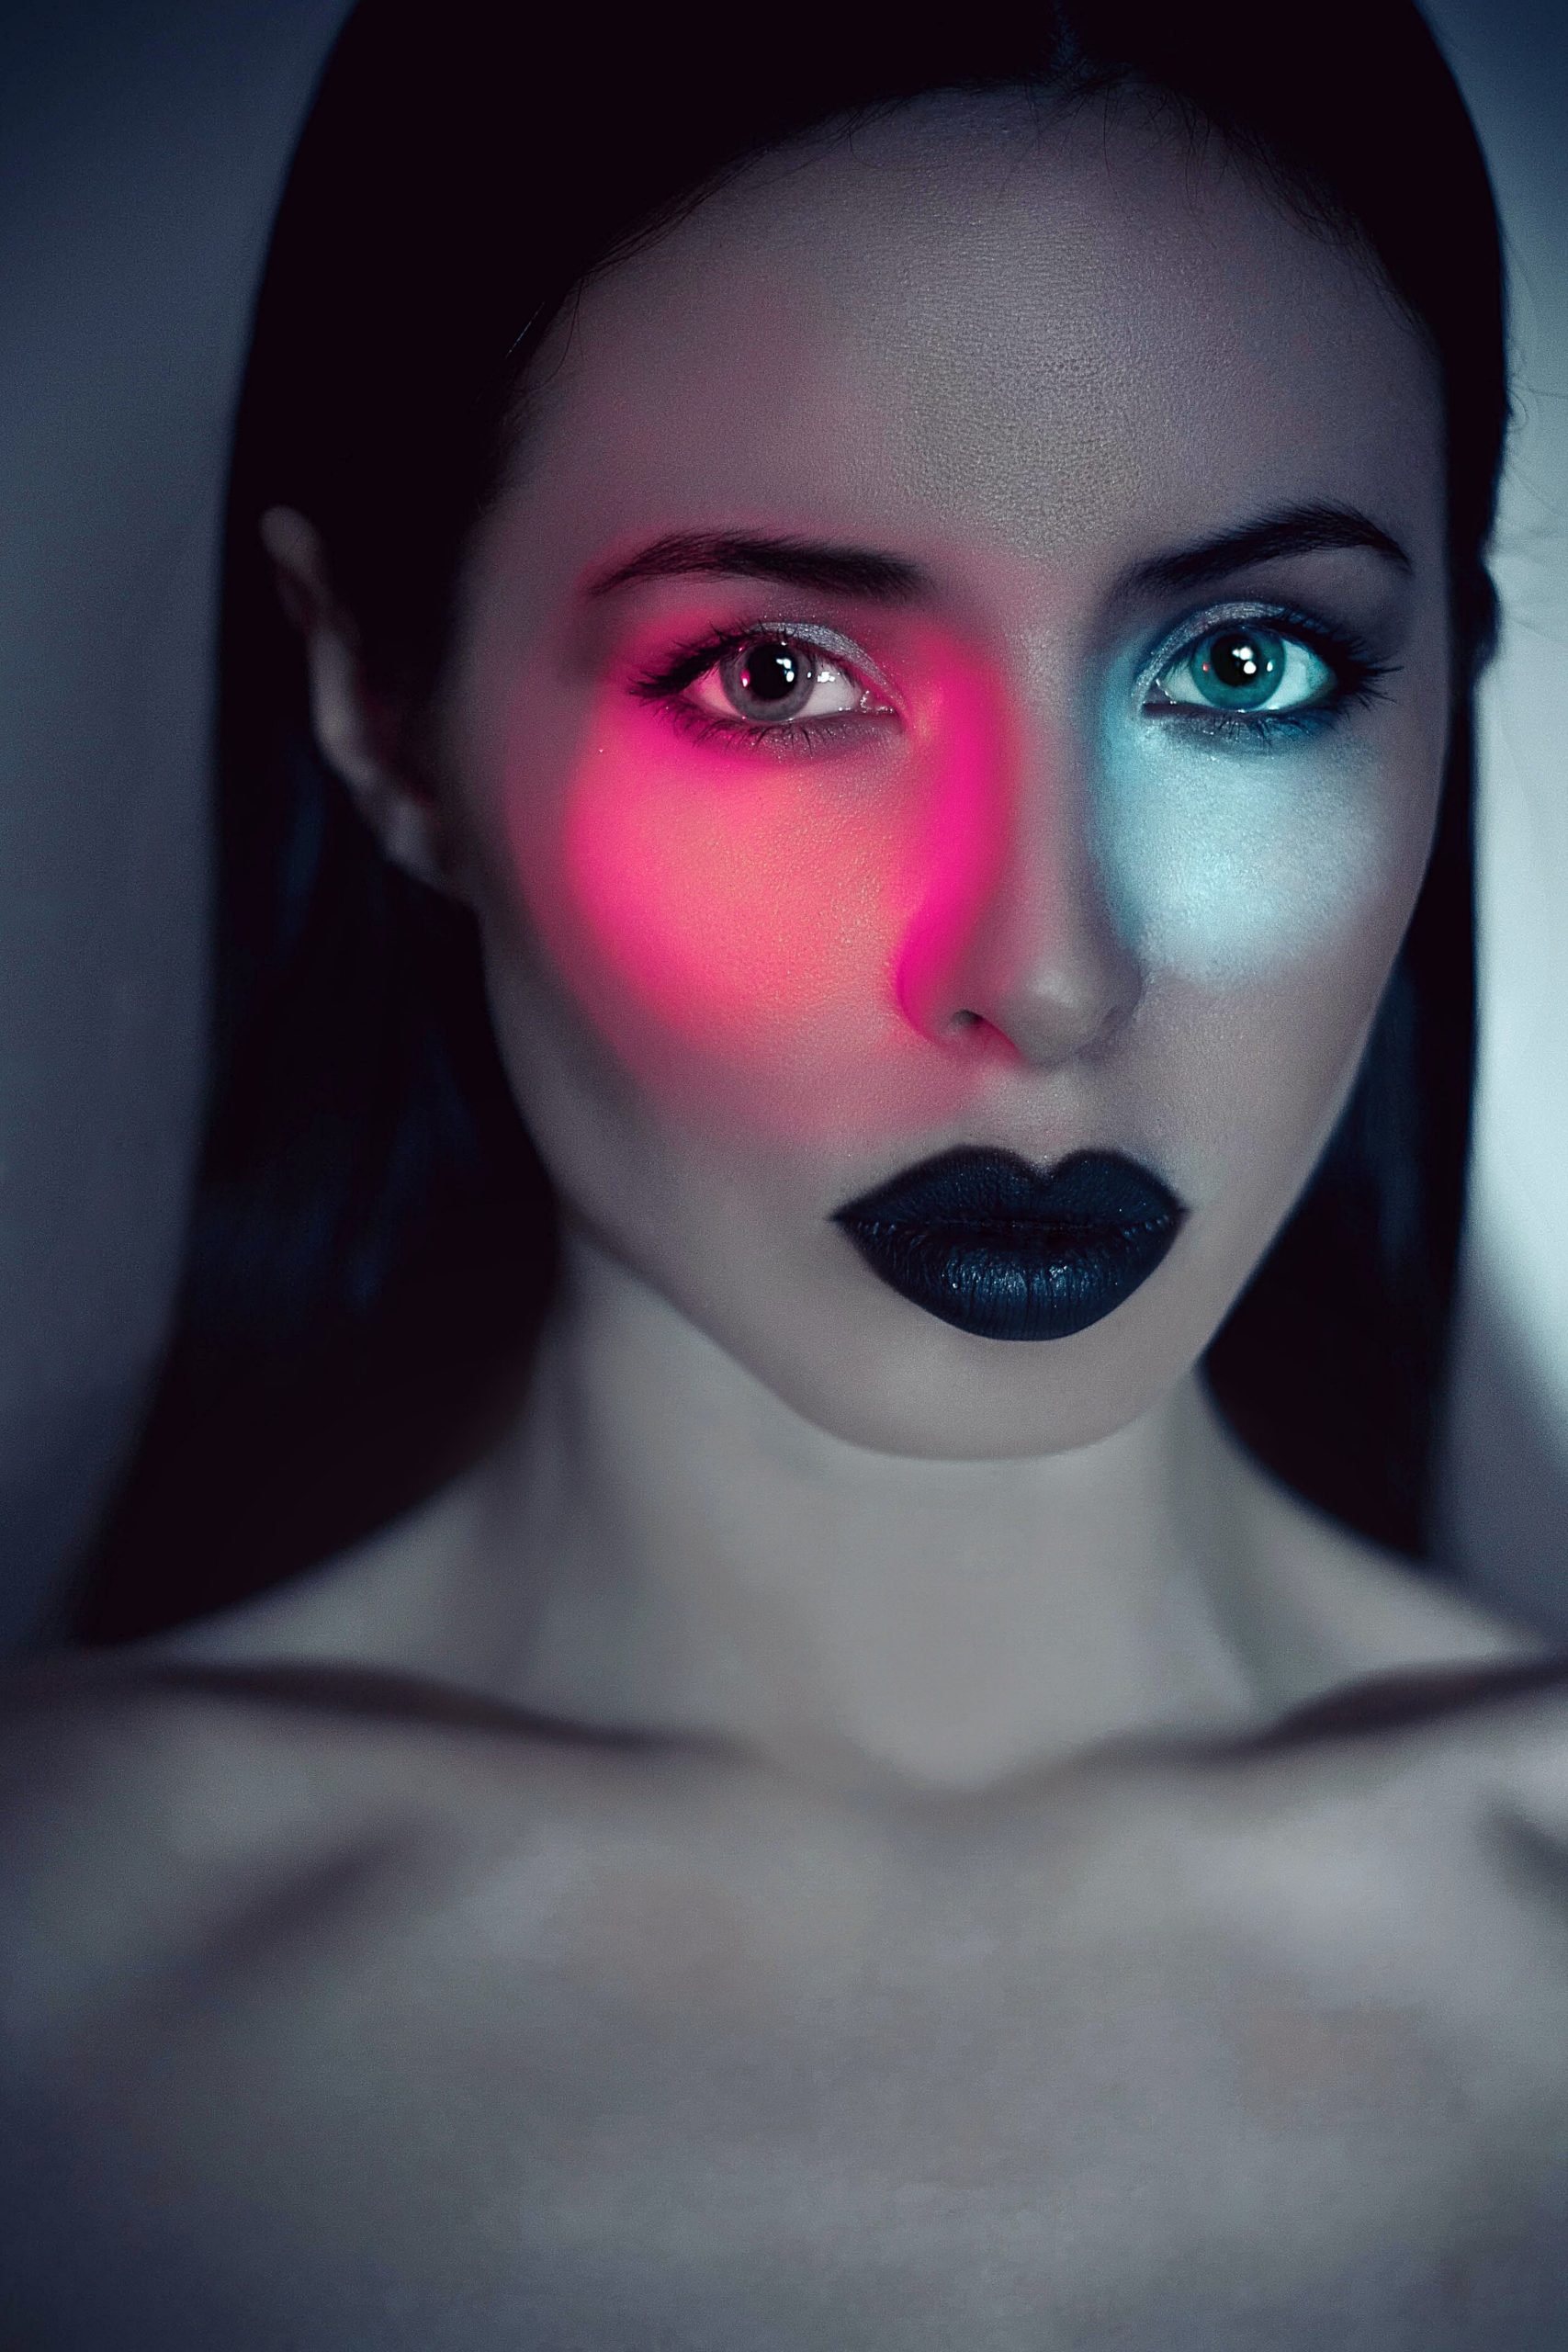 Bold doesn’t always have to be bright. It can simply mean strong contrast, like this black lipstick on her pale skin. Photo by Ksenia Polovodova on Unsplash.